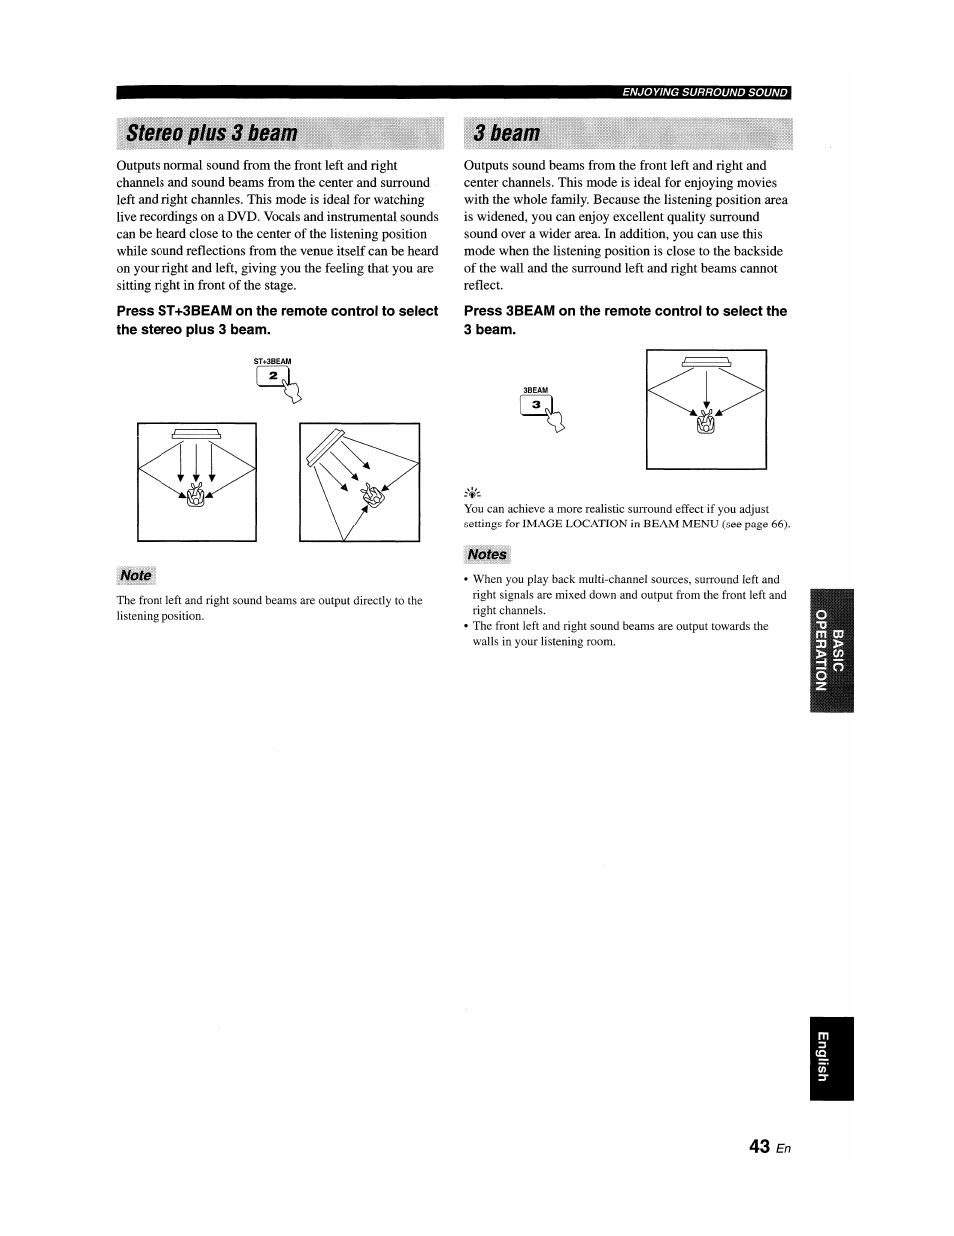 Stereo plus 3 beam, Nate, Steam | Notes | Yamaha YSP-1100 User Manual | Page 47 / 104